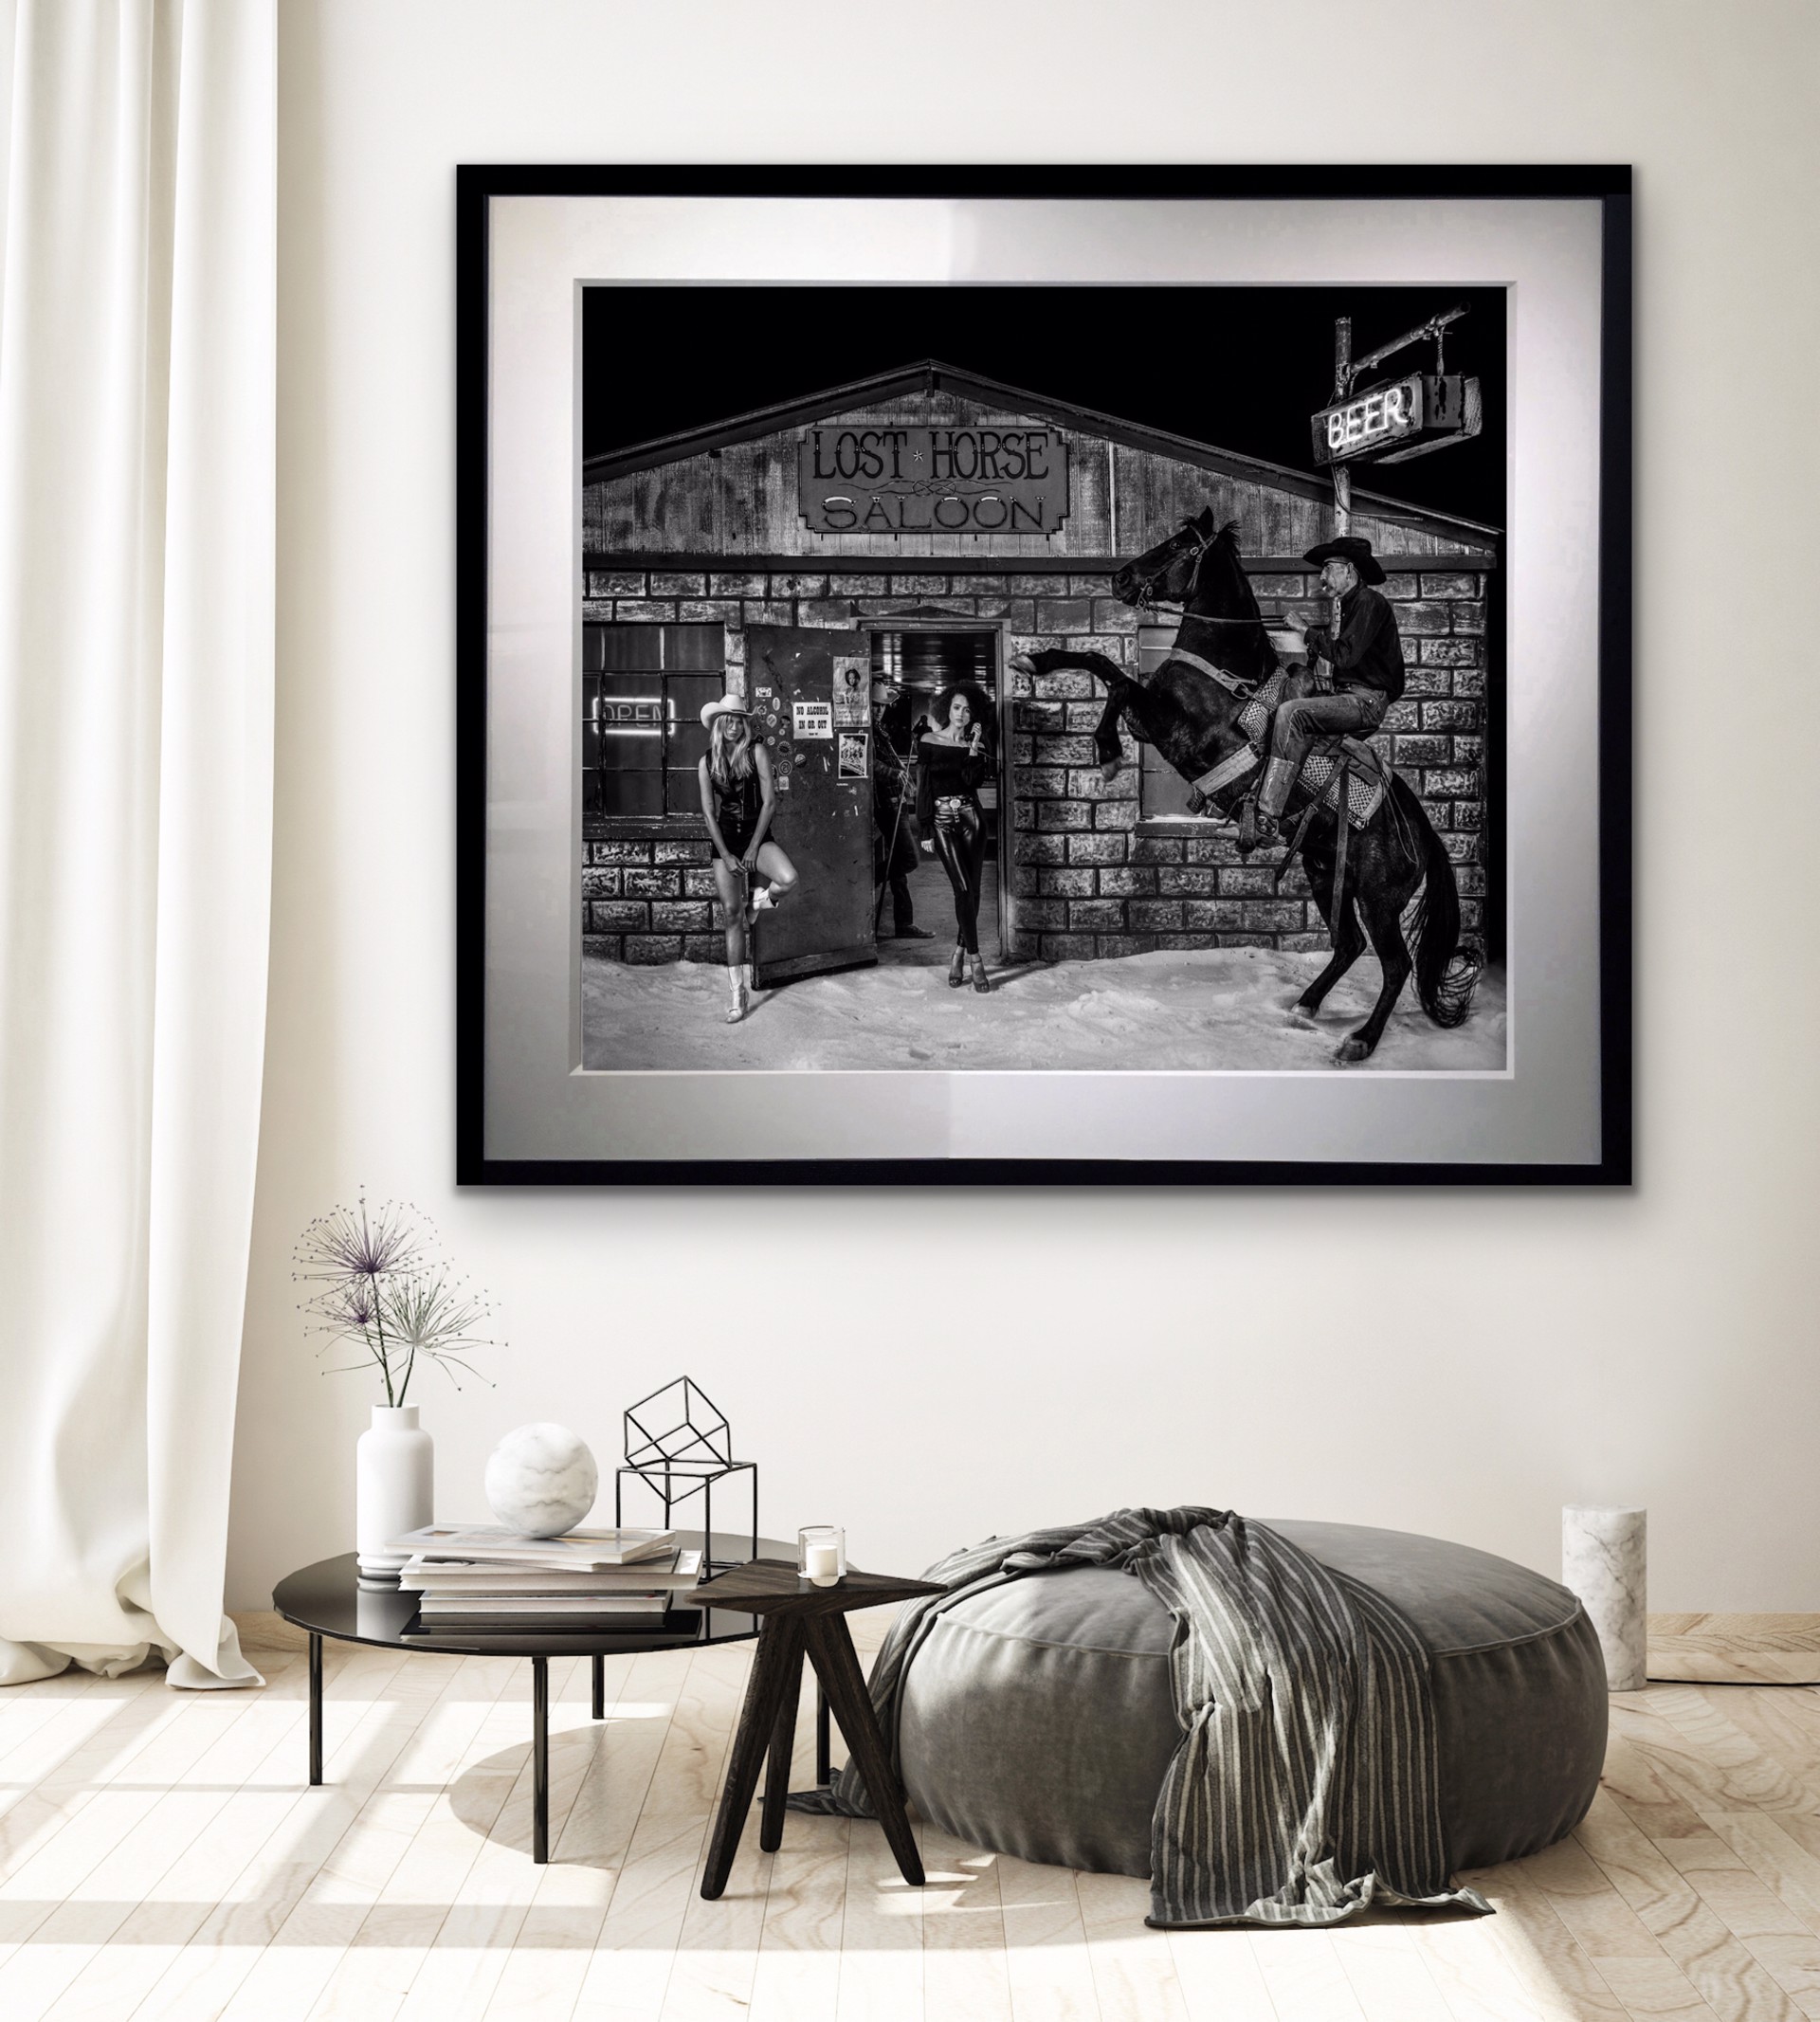 The Lost Horse Saloon by David Yarrow